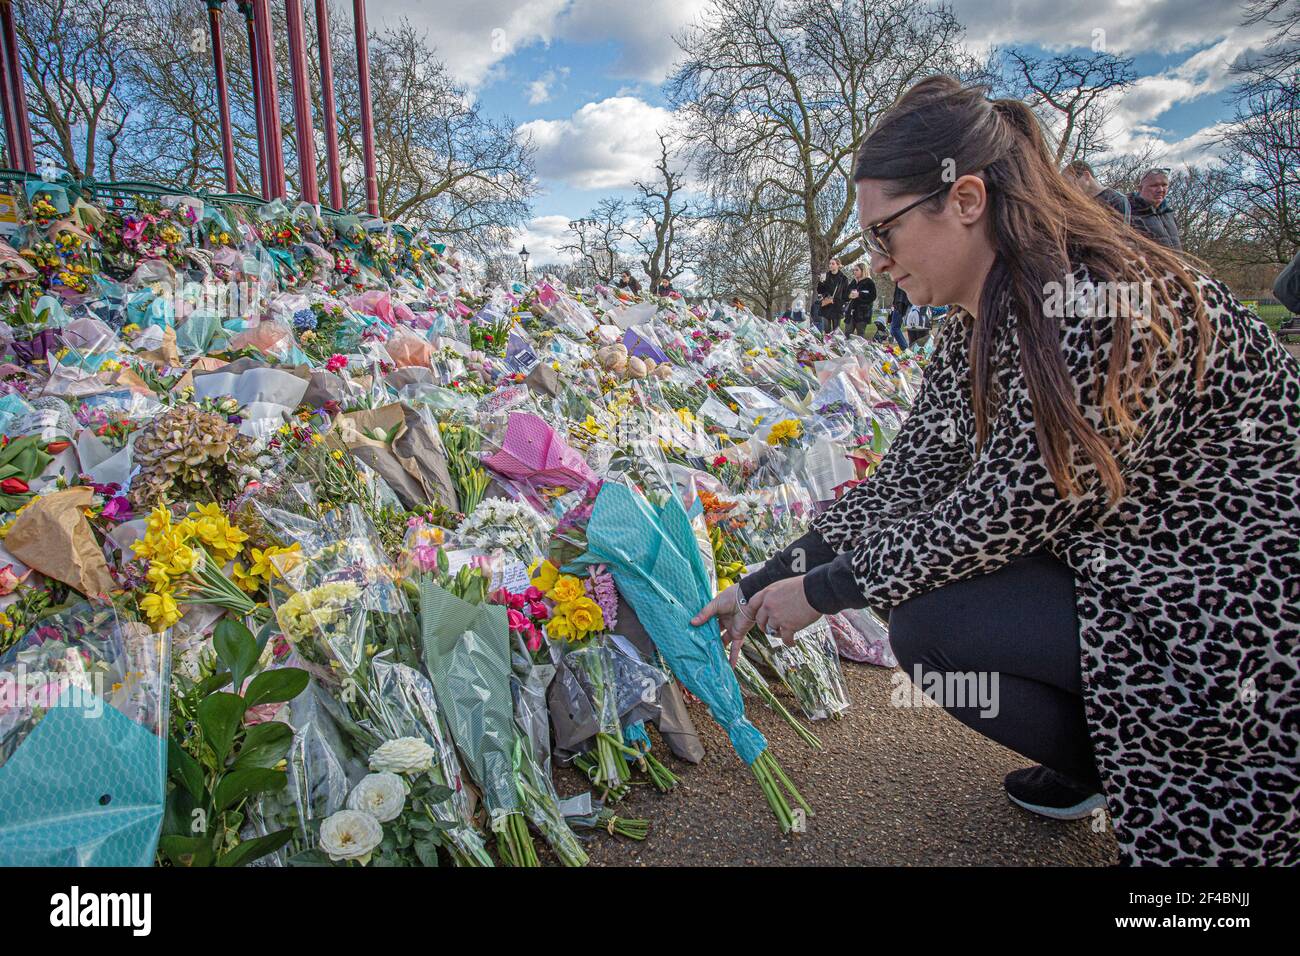 LONDON, ENGLAND - MARCH 19: Woman lays flowers in tribute to murdered Sarah Everard at the bandstand on Clapham Common on March 19, 2021 in London, Stock Photo